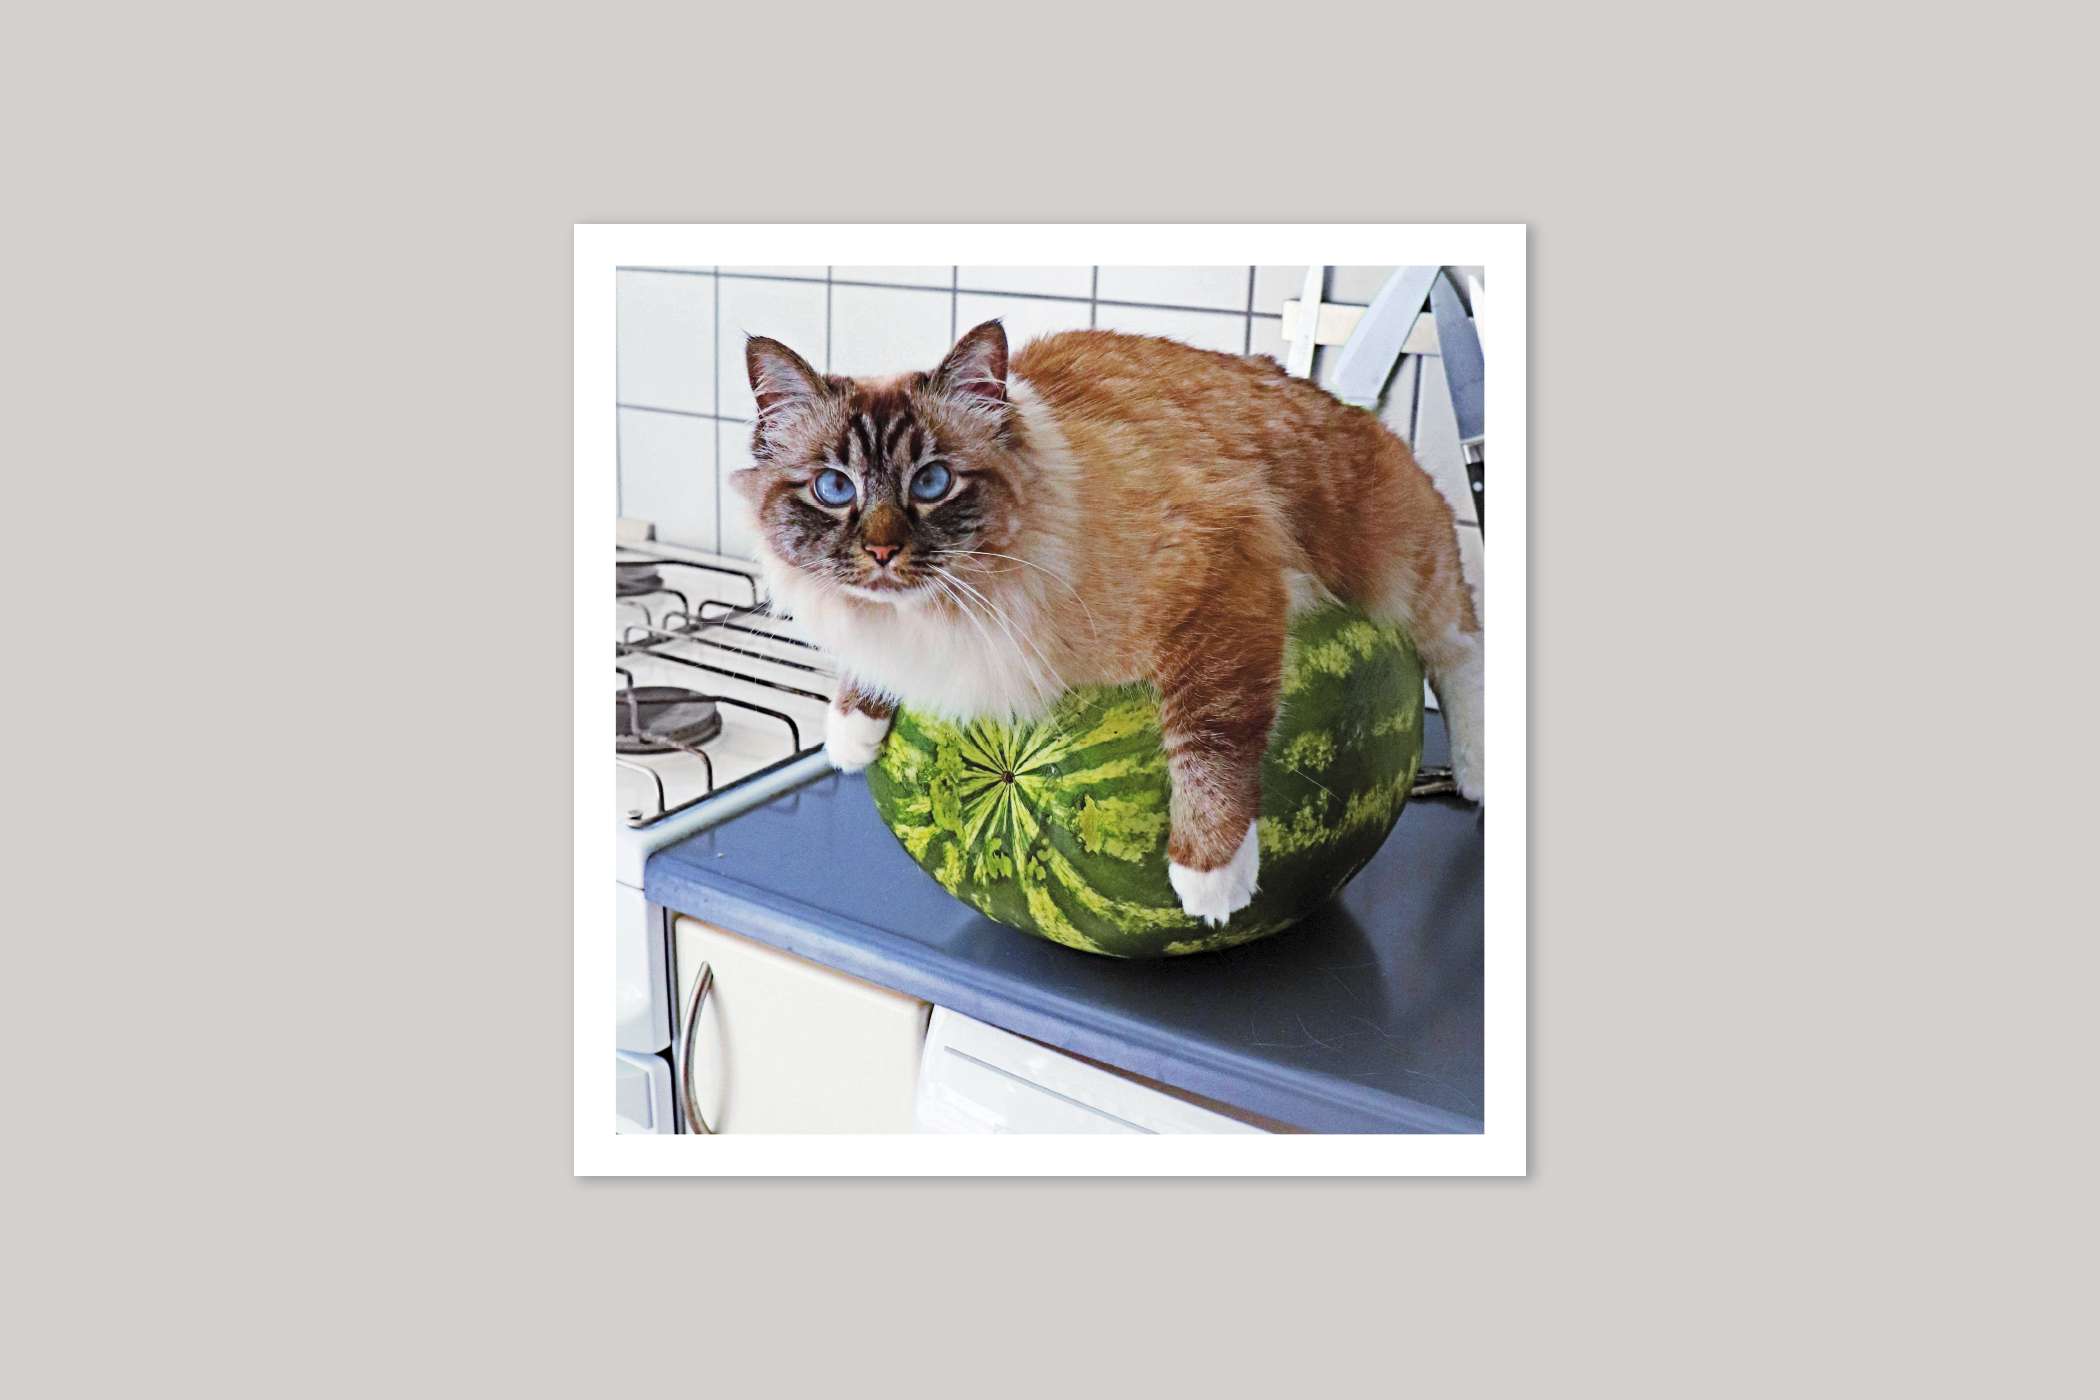 Melon Cat cool photography from Wavelength range of photographic cards by Icon.